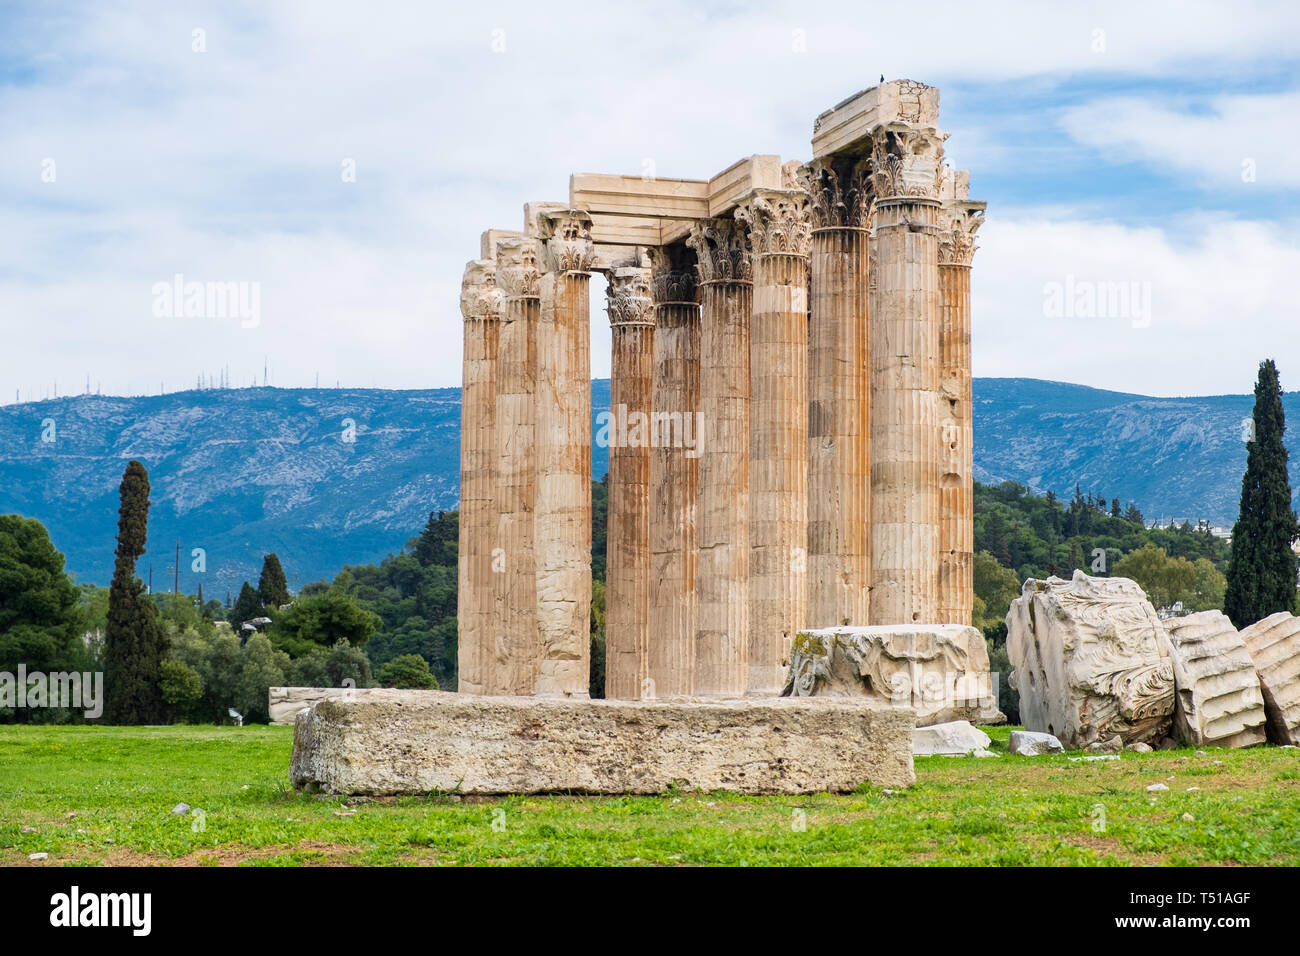 Ruins of the ancient Temple of Olympian Zeus in Athens (Olympieion or Columns of the Olympian Zeus) Stock Photo